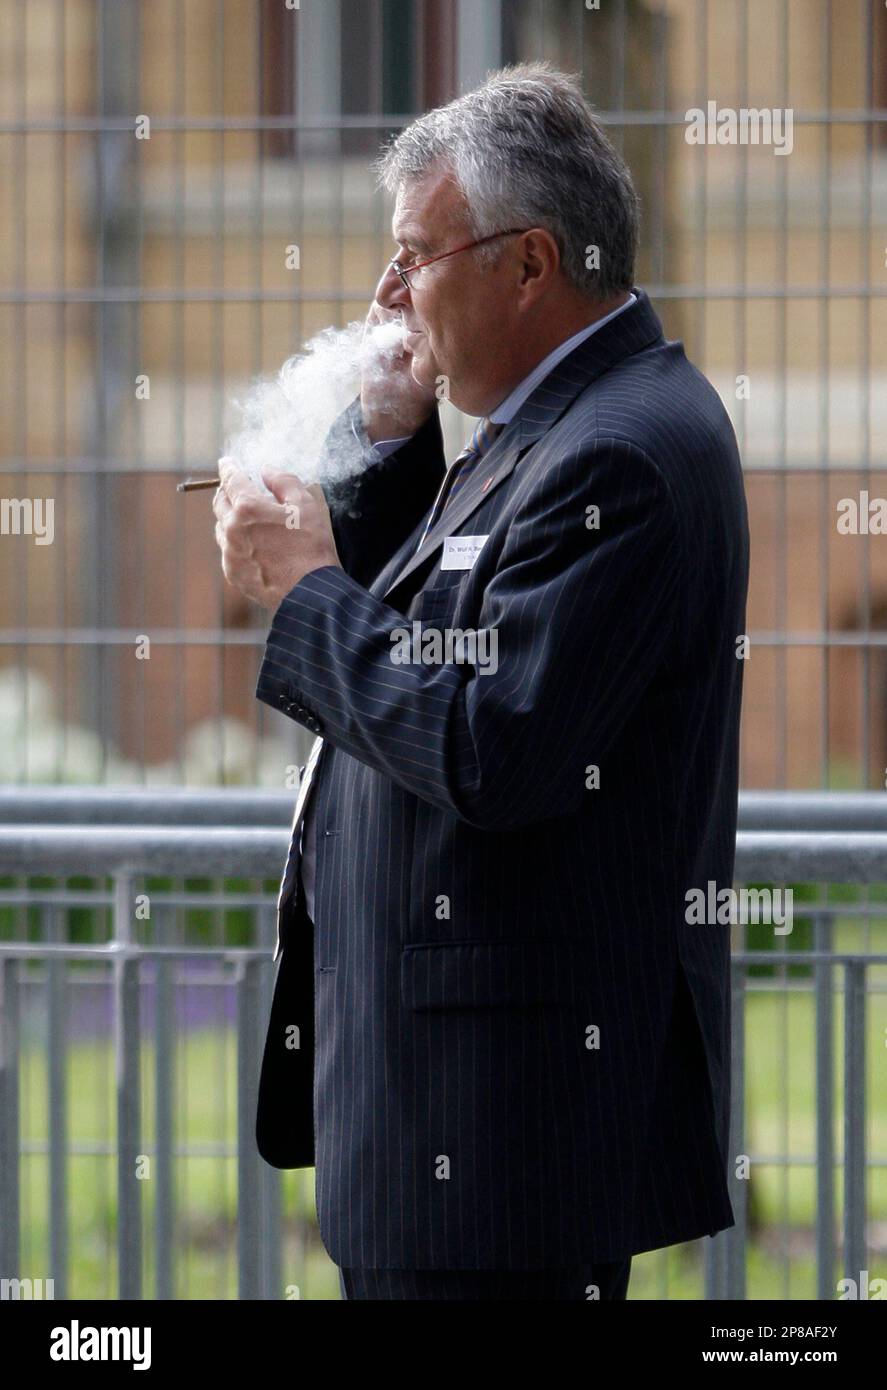 Wulf Bernotat, CEO of German power utility E.ON, smokes a cigarette before  the celebrations marking the 50th anniversary of the German Atomic Forum  (DAtF) in Berlin, Wednesday July 1, 2009. (AP Photo/Tobias